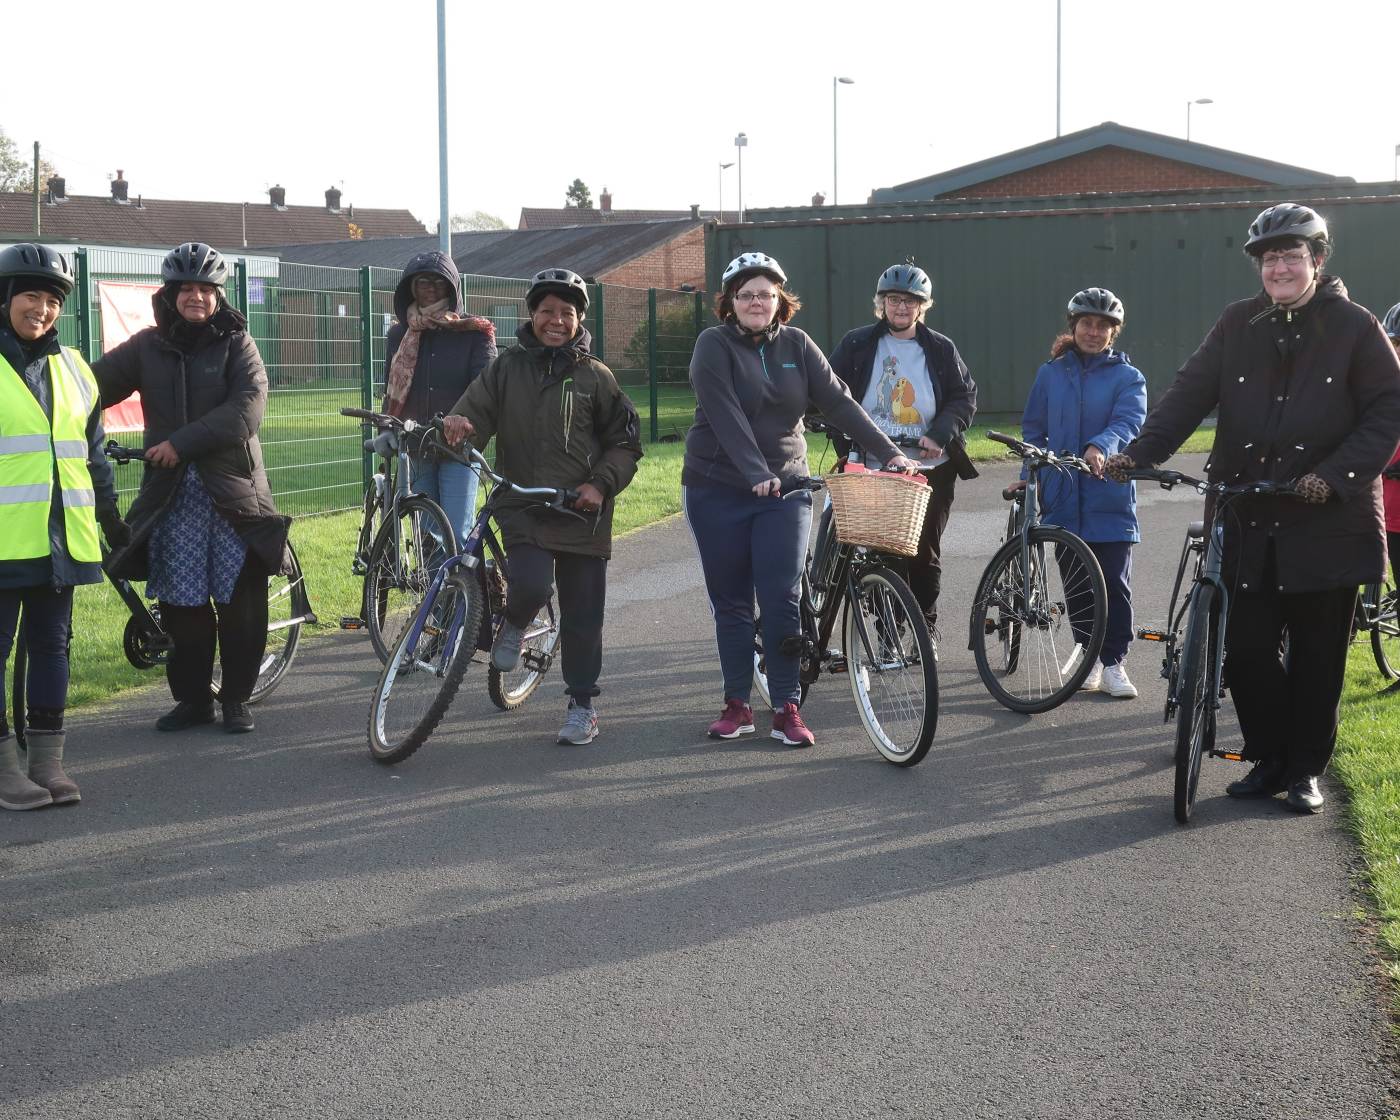 Tameside Womens Community Cycling Group stood with their bikes